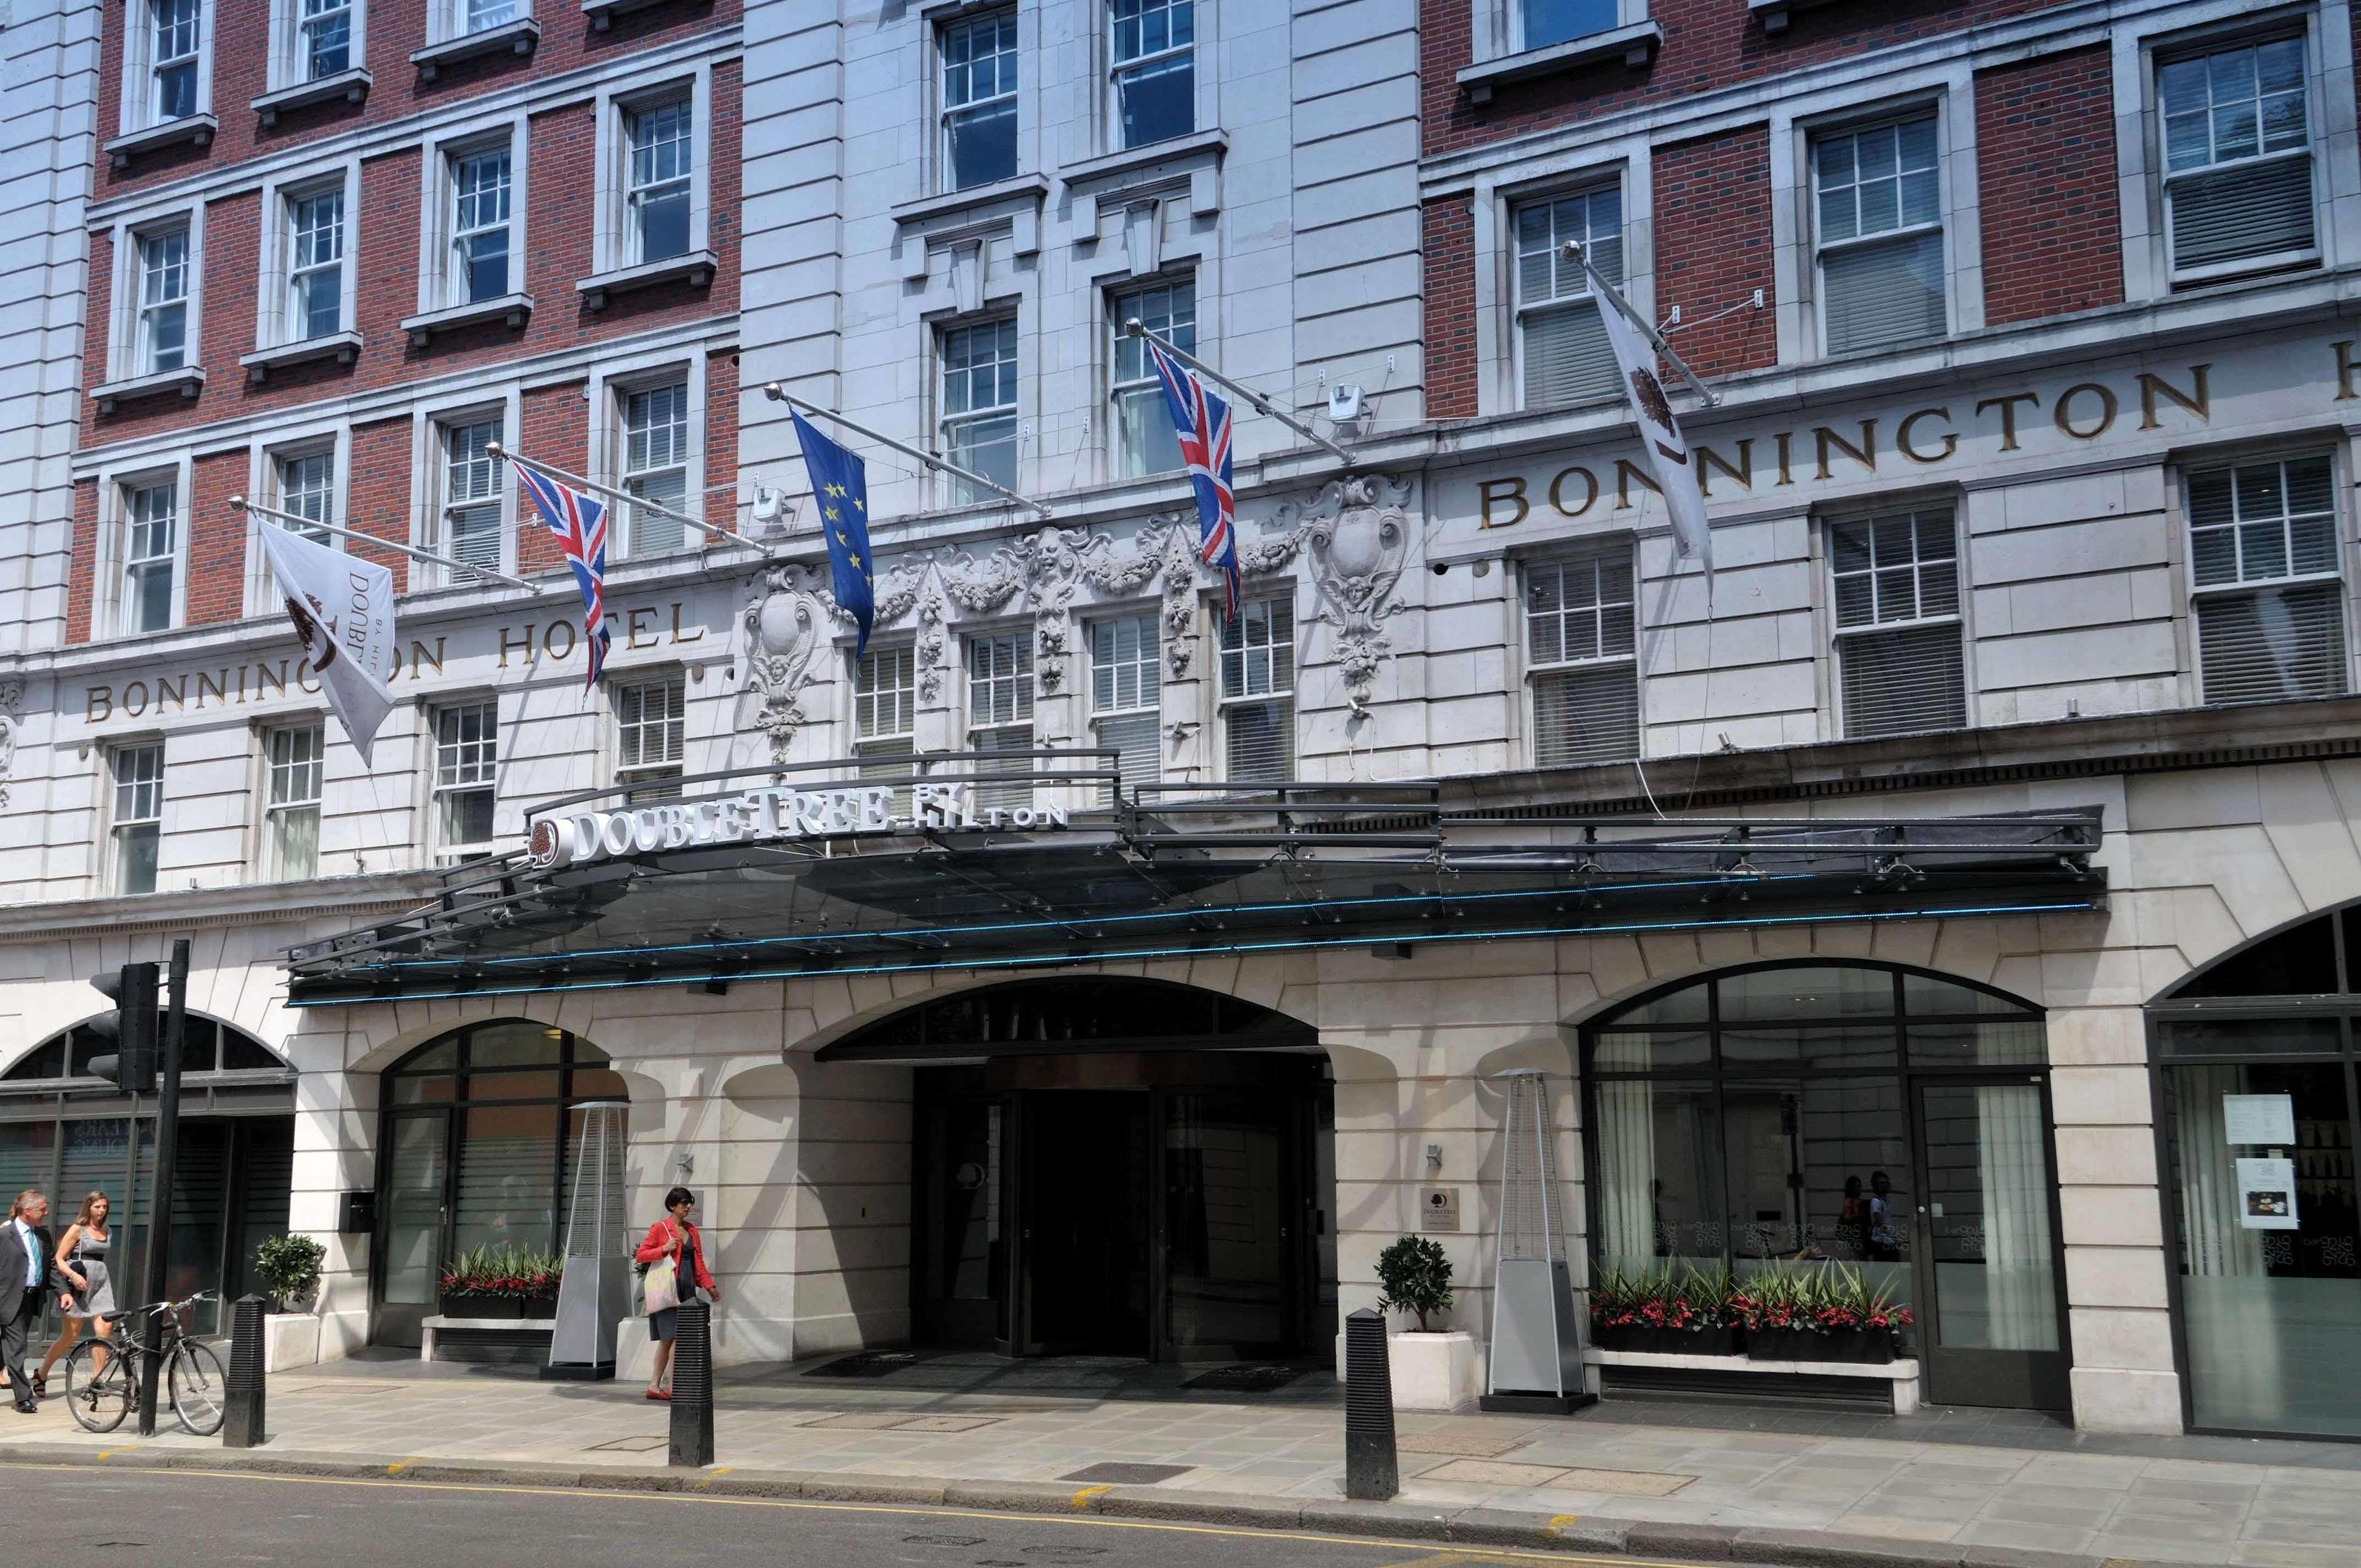 Hotel Doubletree By Hilton London - West End Exterior foto